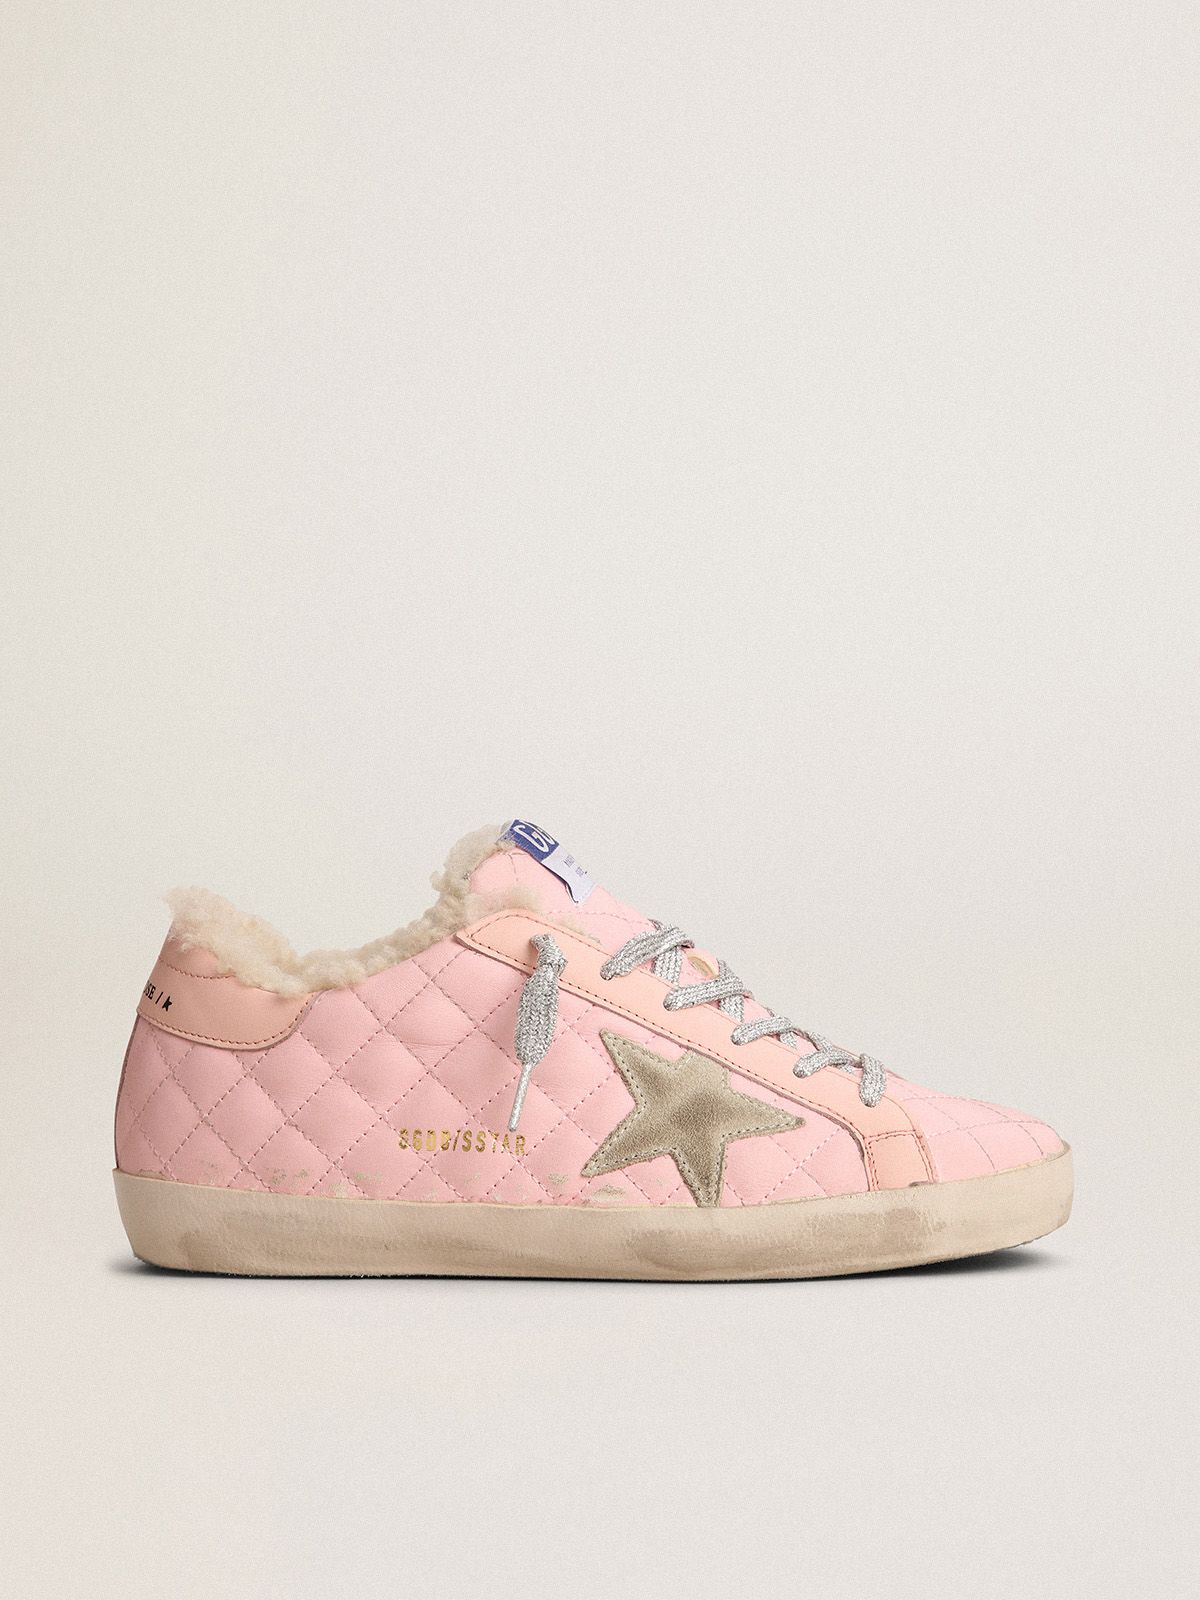 Super-Star sneakers in pink quilted leather with shearling lining